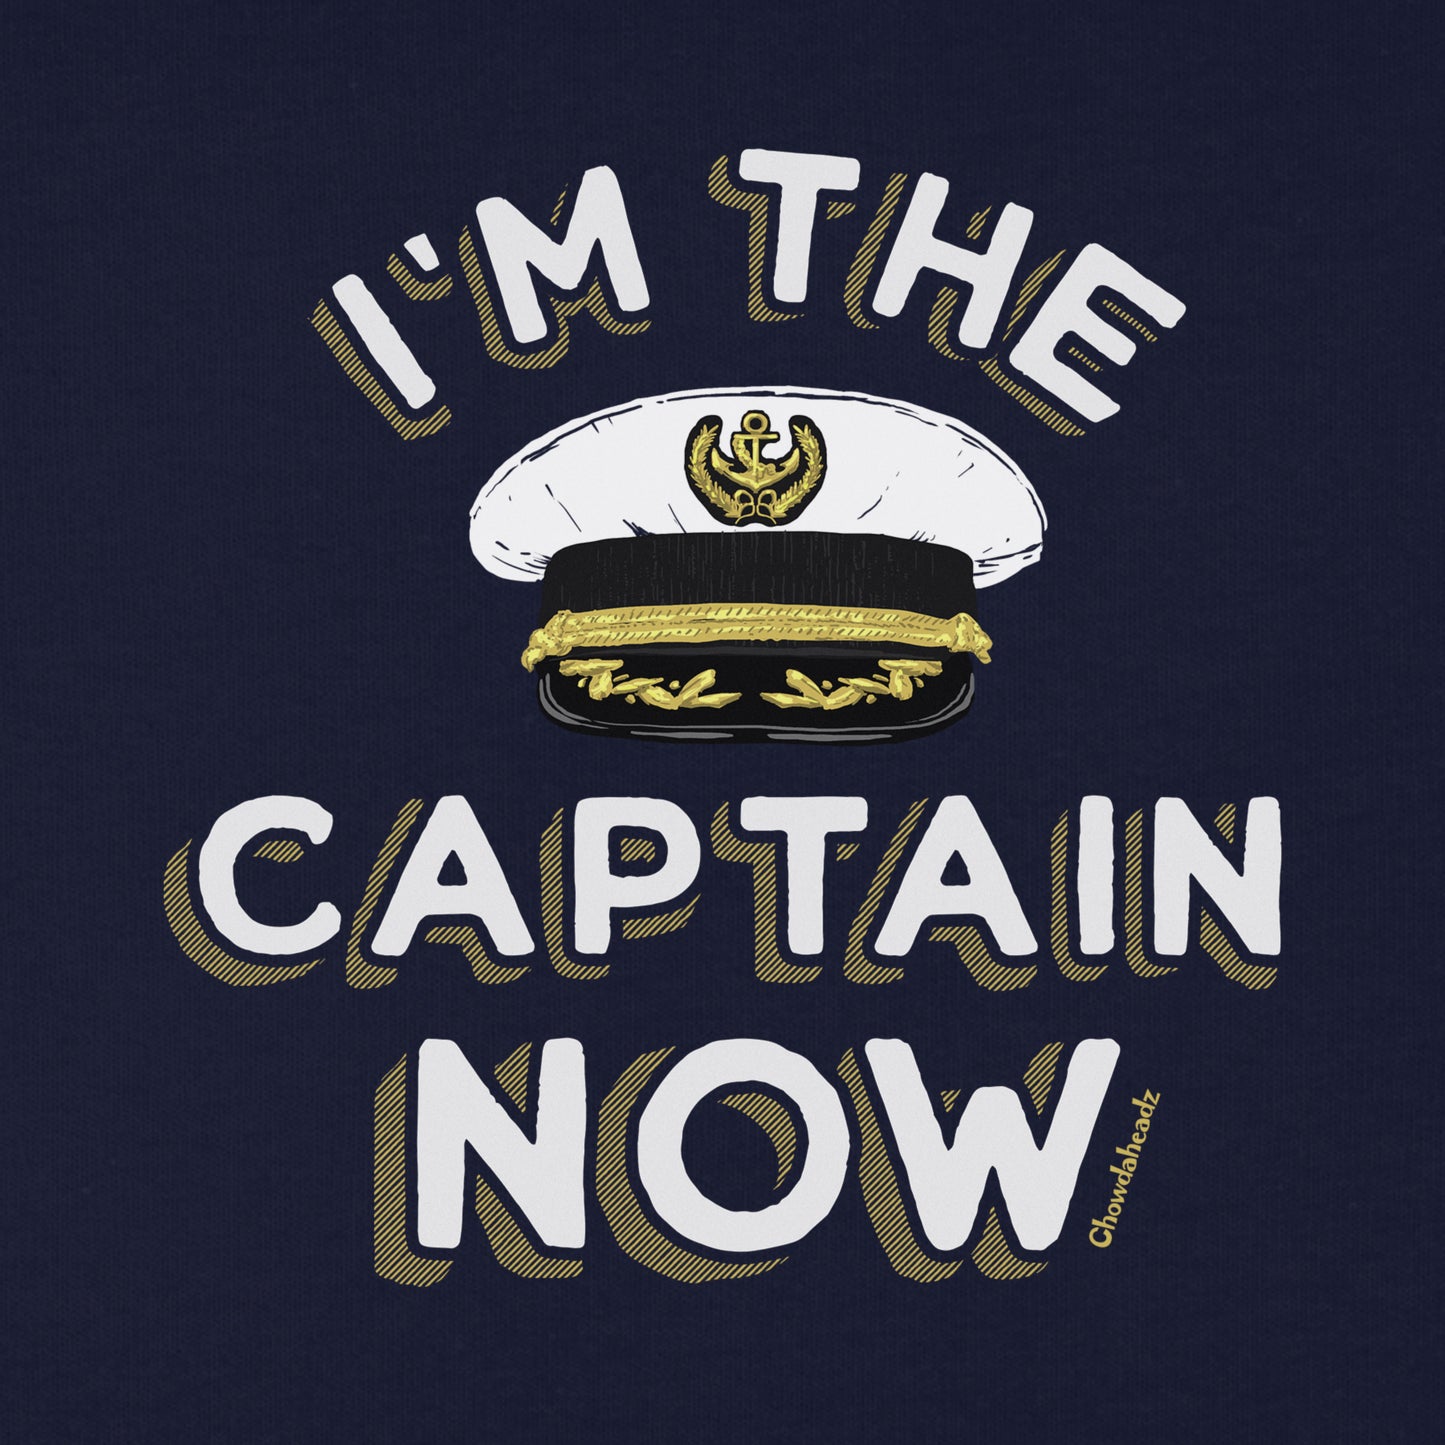 I'm The Captain Now Youth T-Shirt - Chowdaheadz